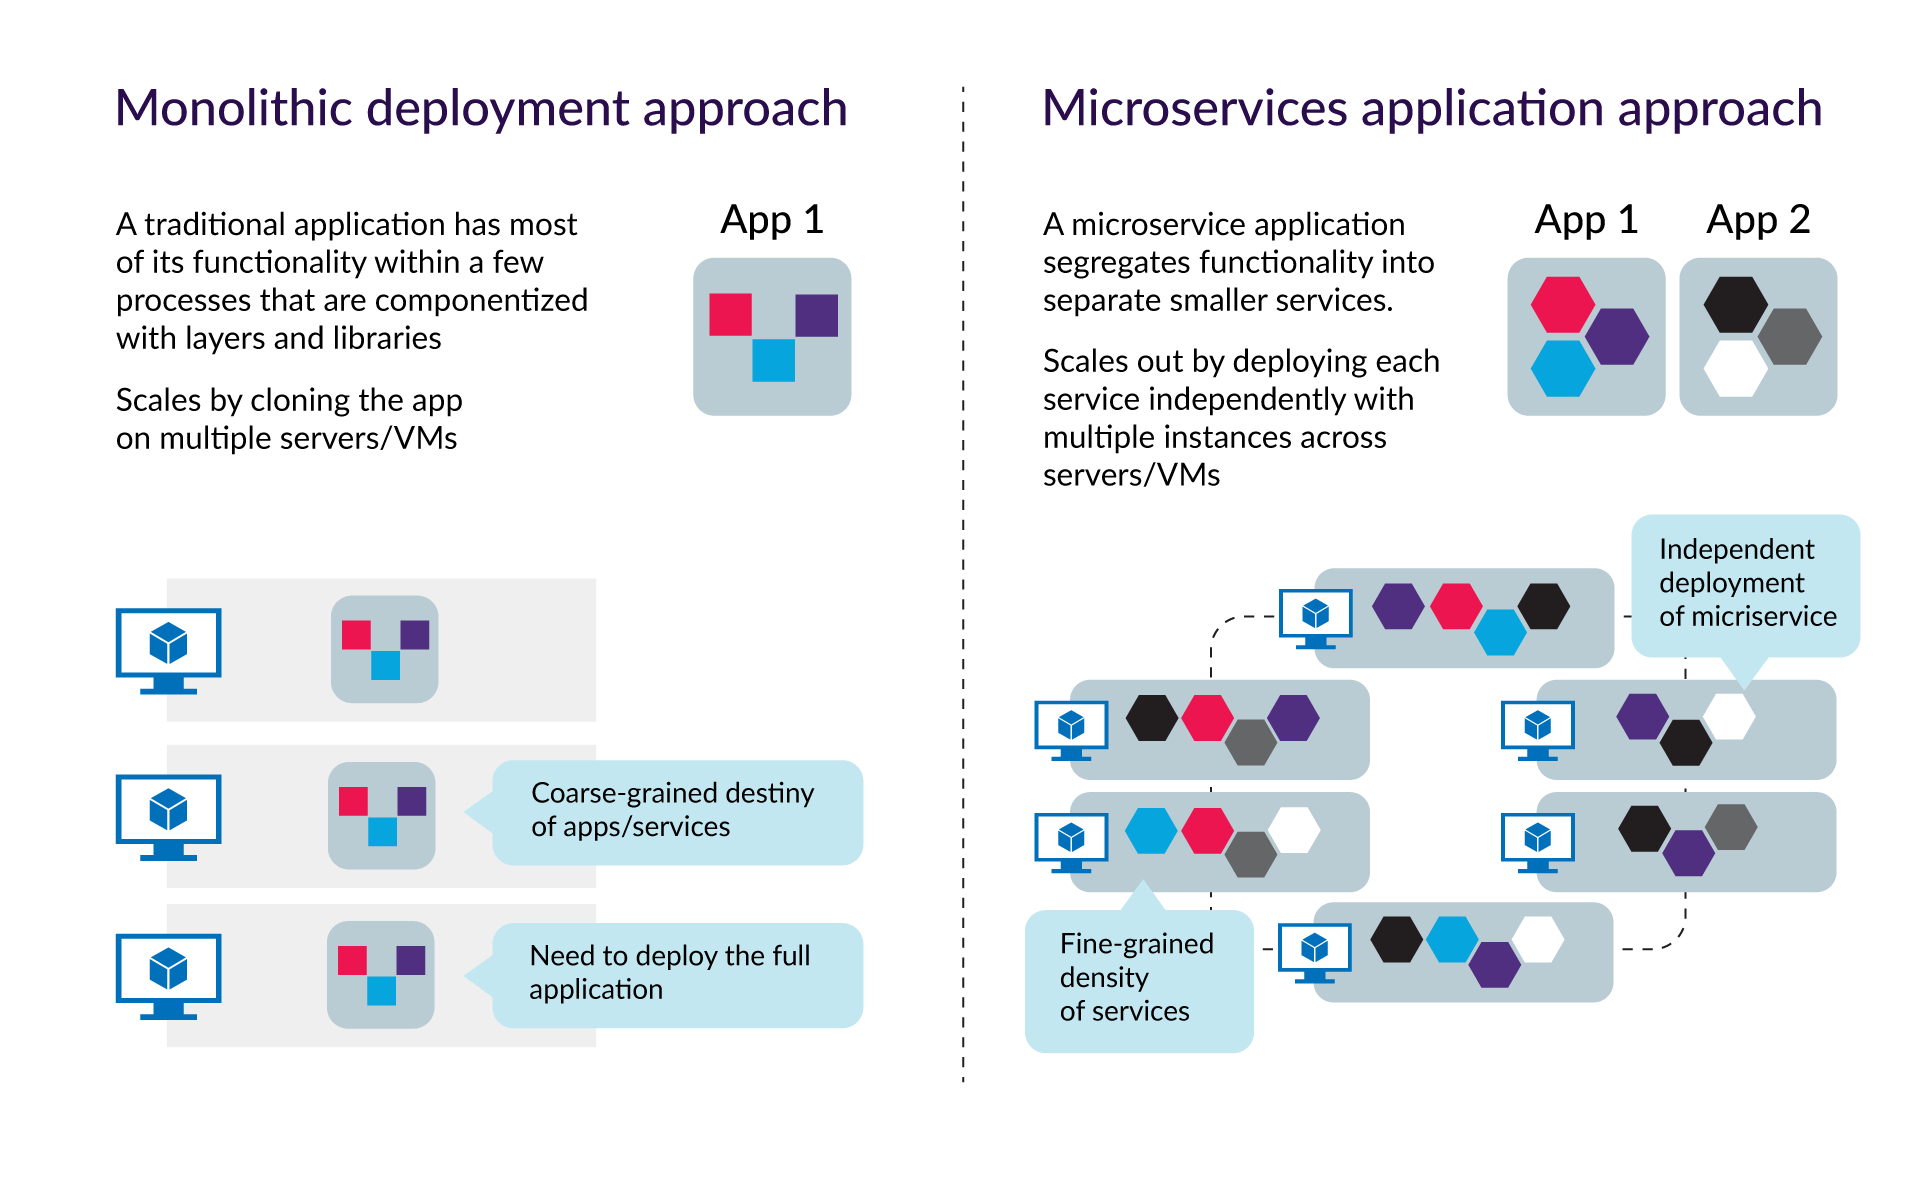 Monolithic deployment approach vs microservices application approach